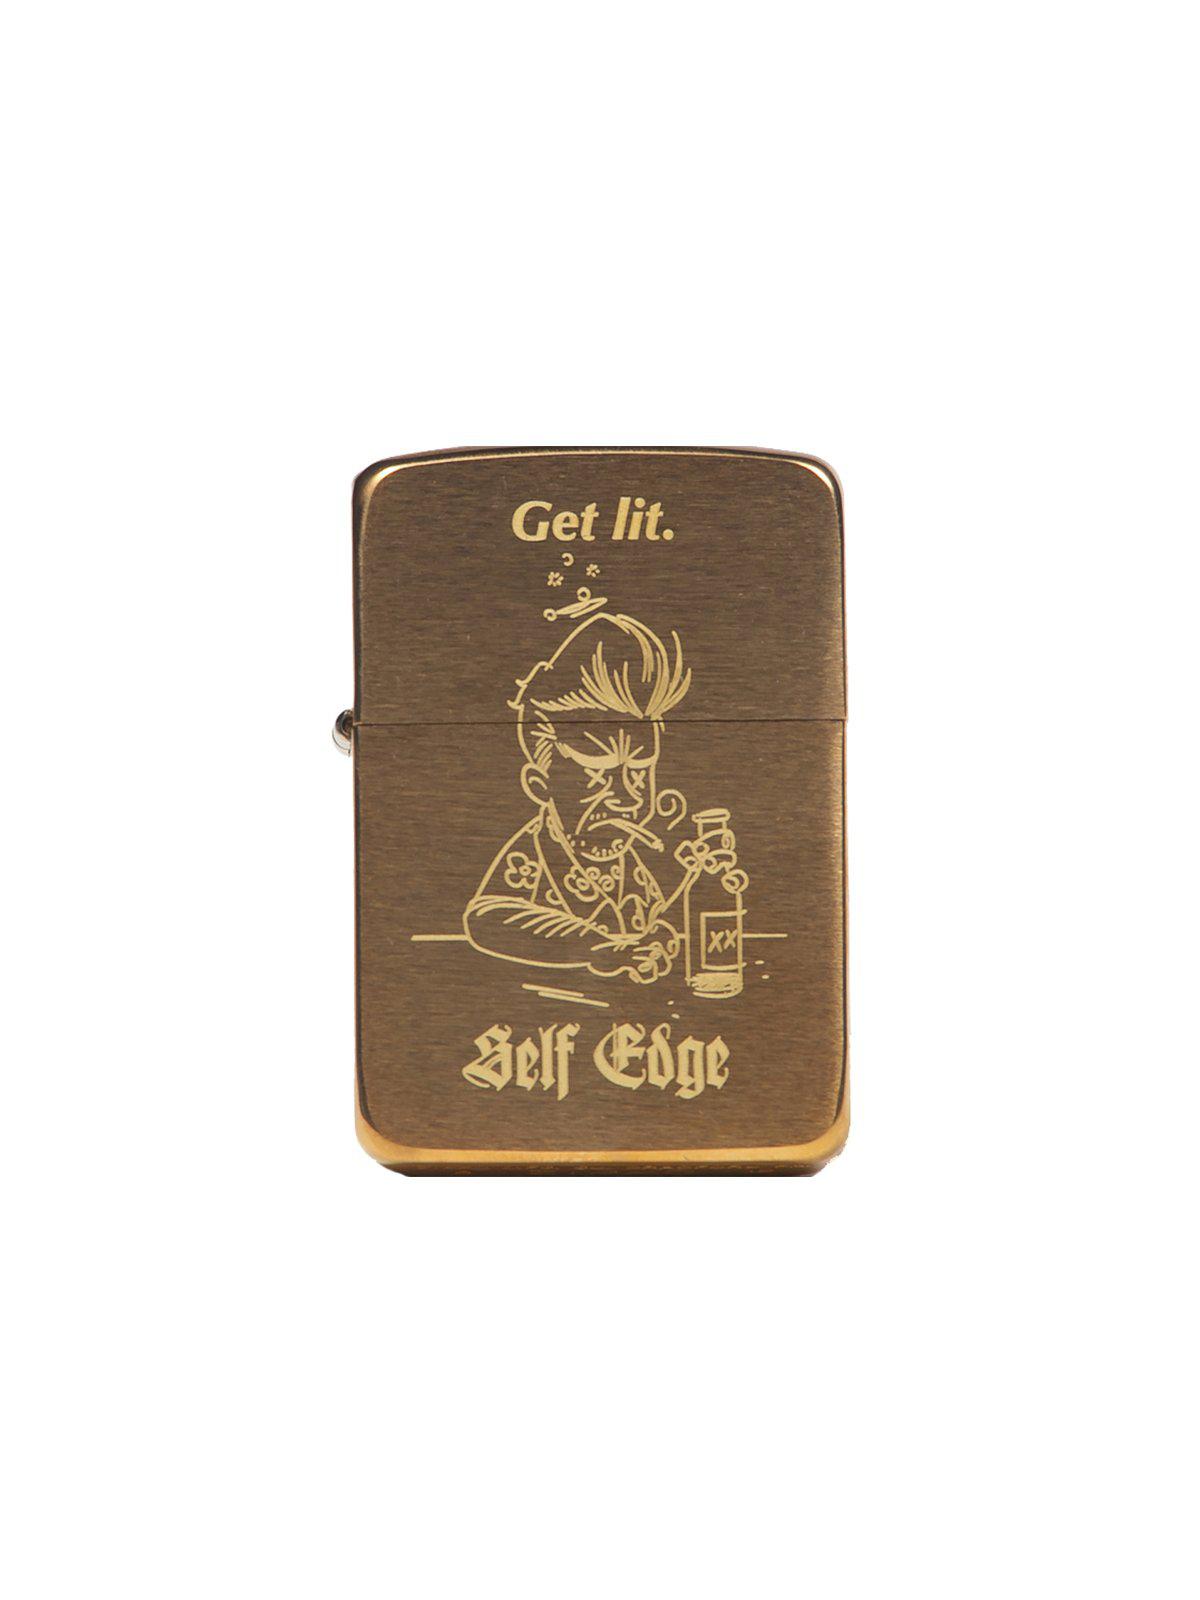 Self Edge Zippo Vintage 1941 Repro Lighter Get Lit - MORE by Morello Indonesia